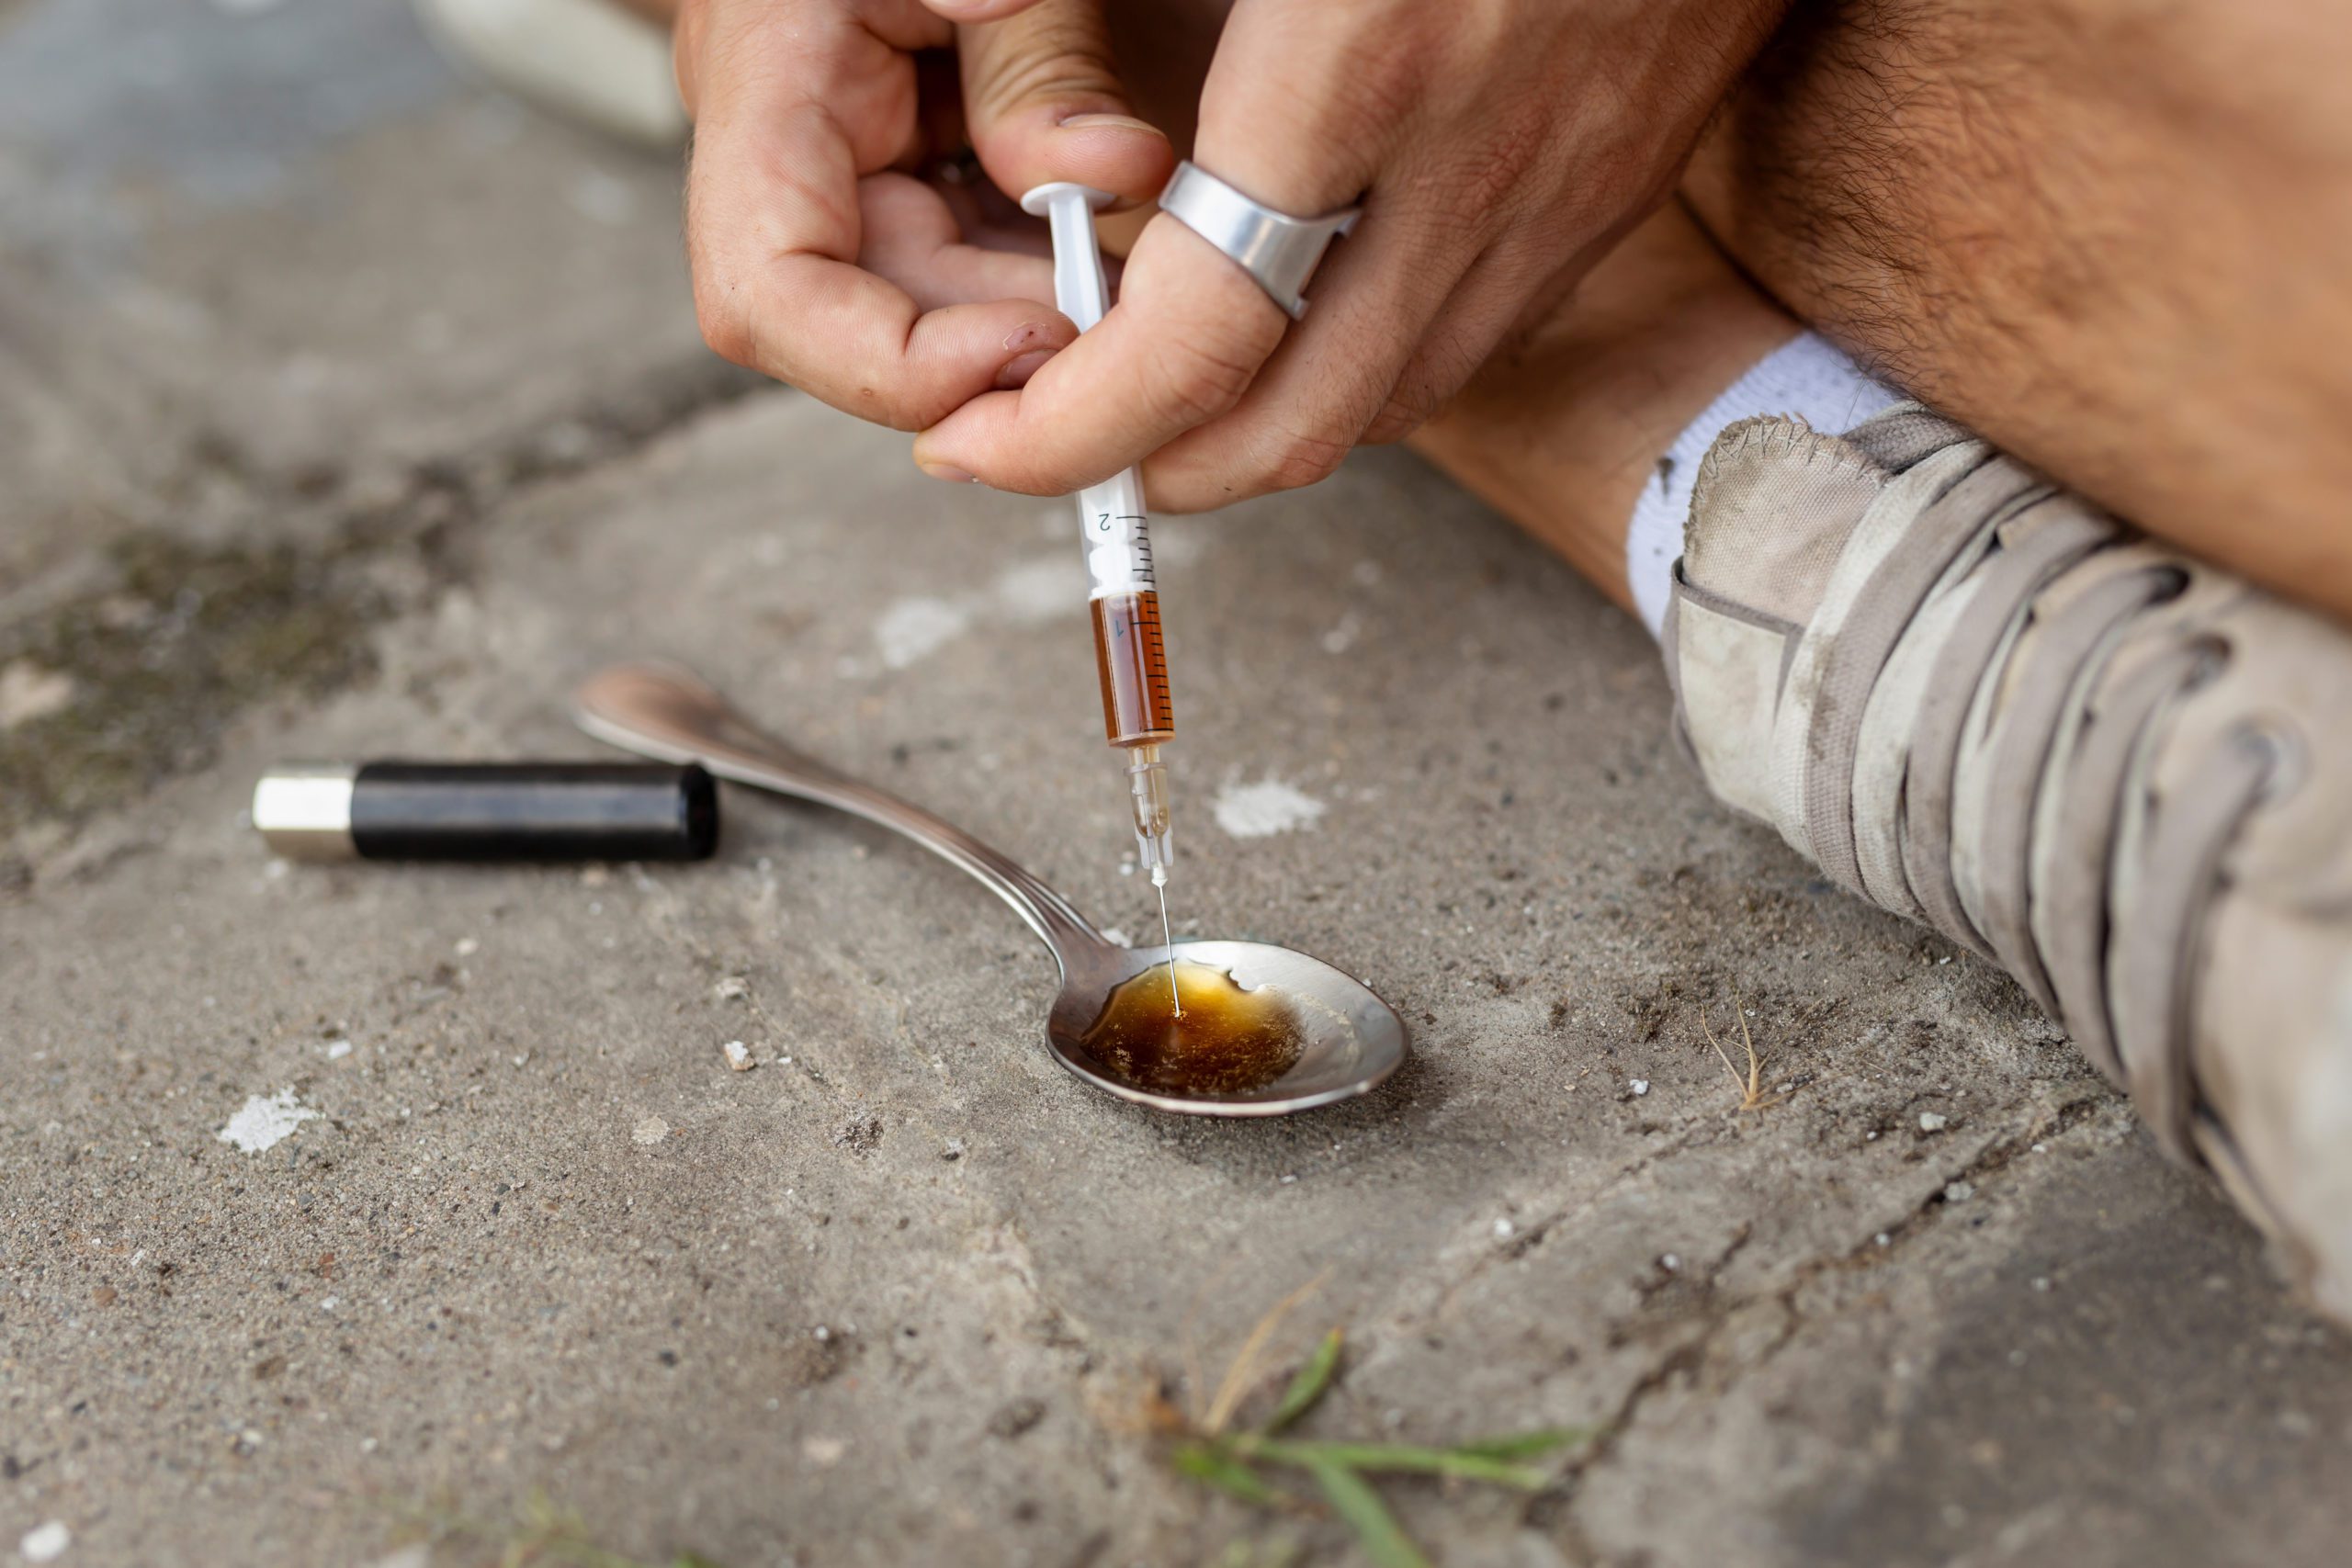 What Are The Signs of Heroin Addiction